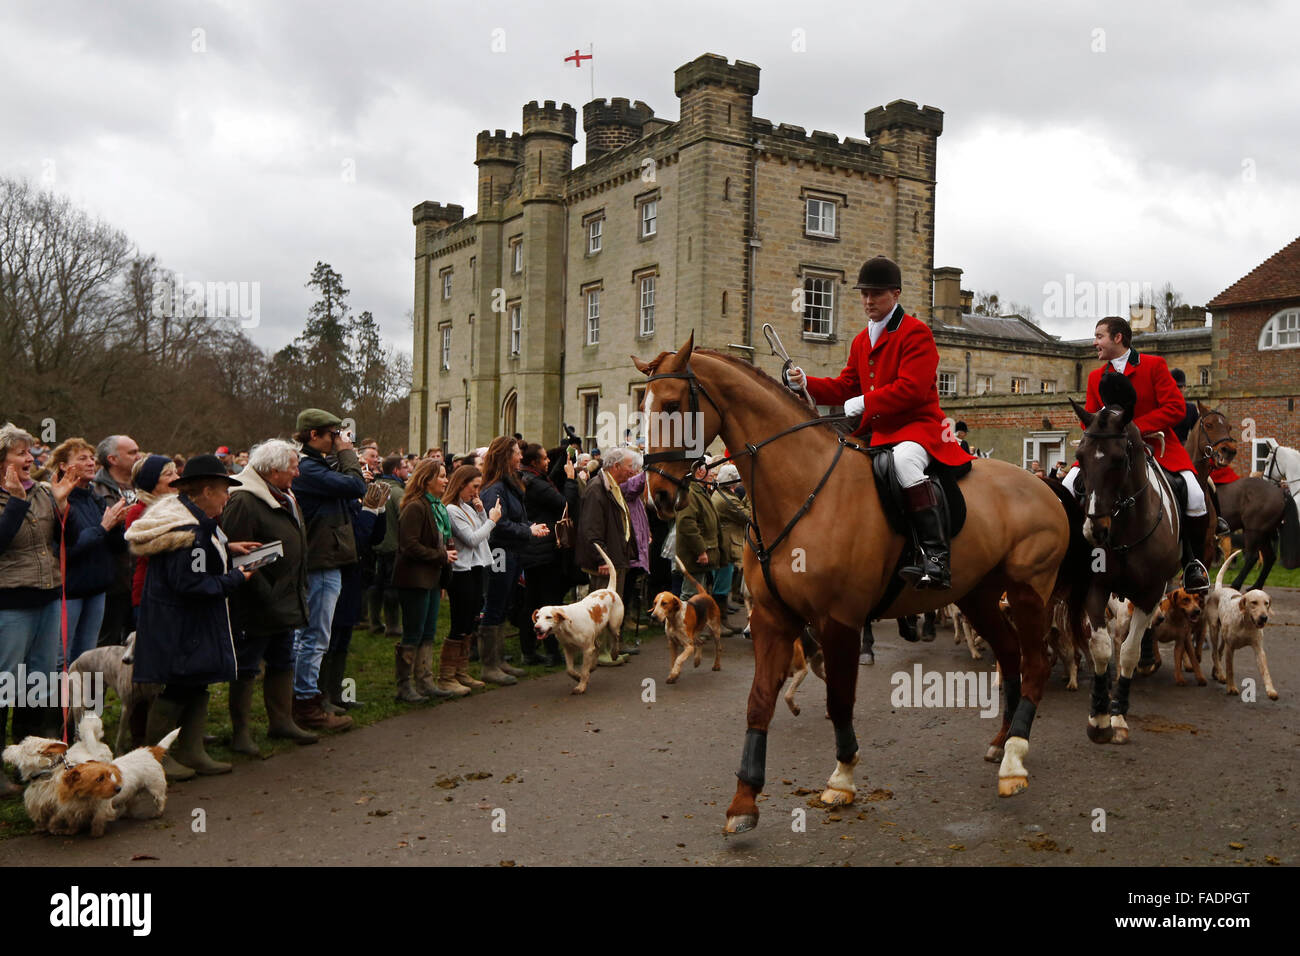 Members of the Old Surrey Burstow and West Kent Hunt depart Chiddingstone Castle for the annual Boxing Day hunt in Chiddingstone Stock Photo